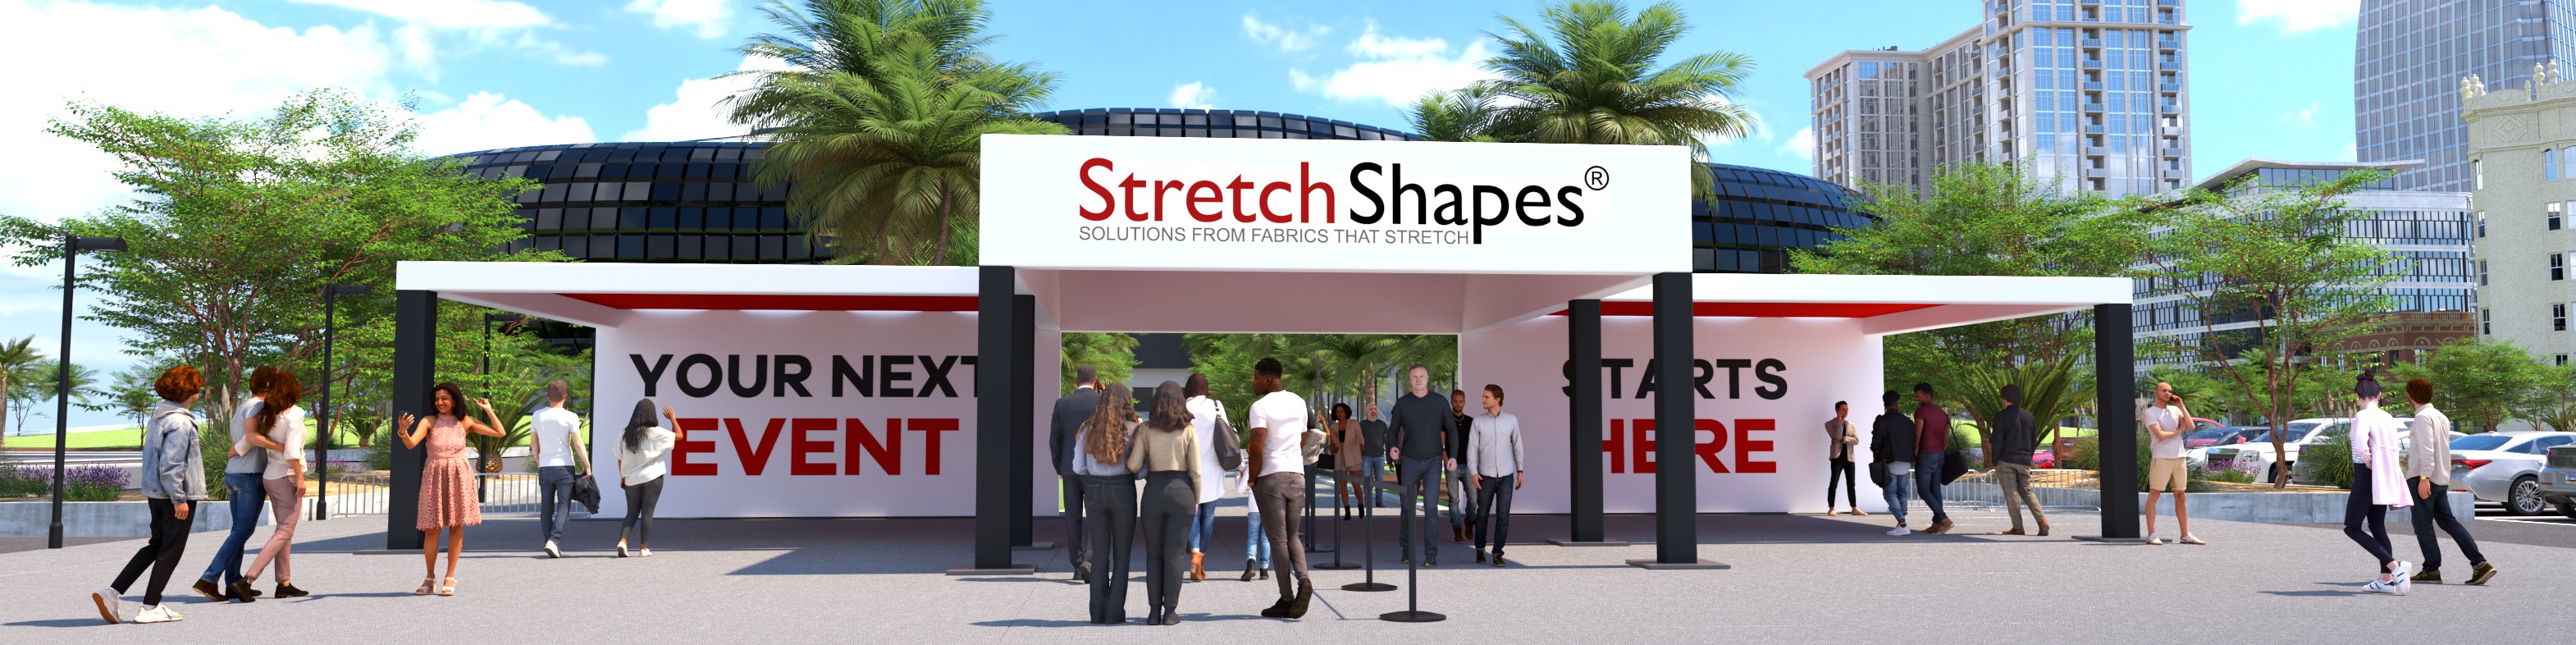 View of The Entrance To An Outdoor Festival Made Of Truss Covered With High Performance Outdoor Stretch Fabric Printed With The Stretch Shapes Logo